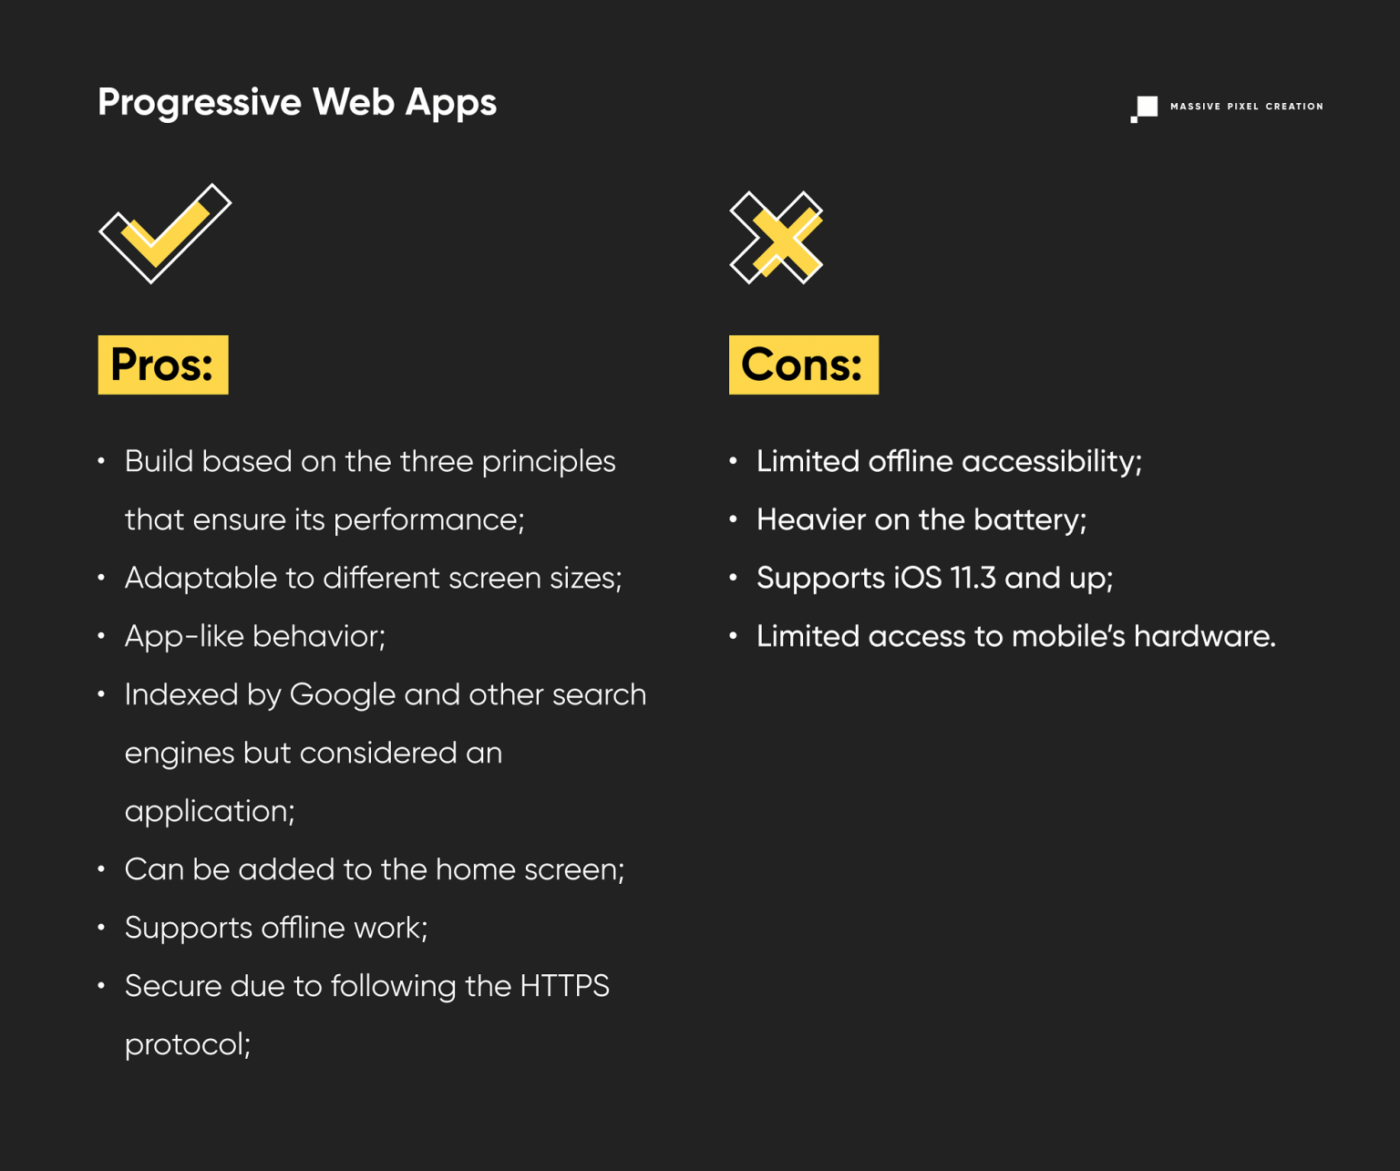 PWA pros and cons